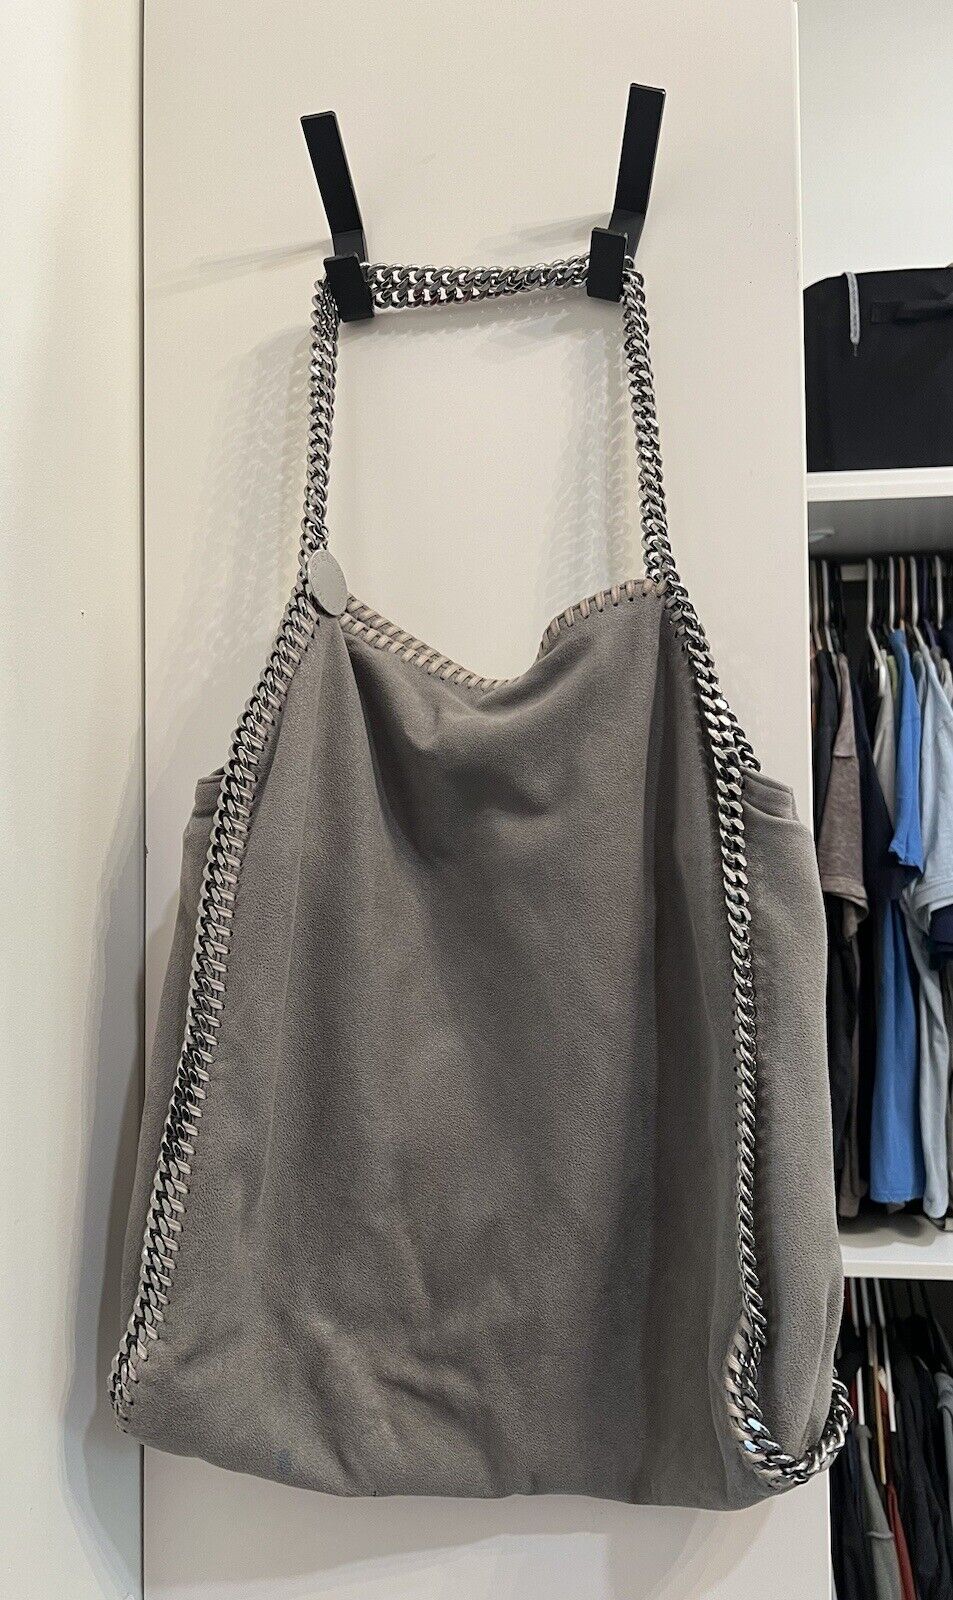 Stella McCartney Large Falabella Ombre Grey Faux Leather Tote With Chain Link